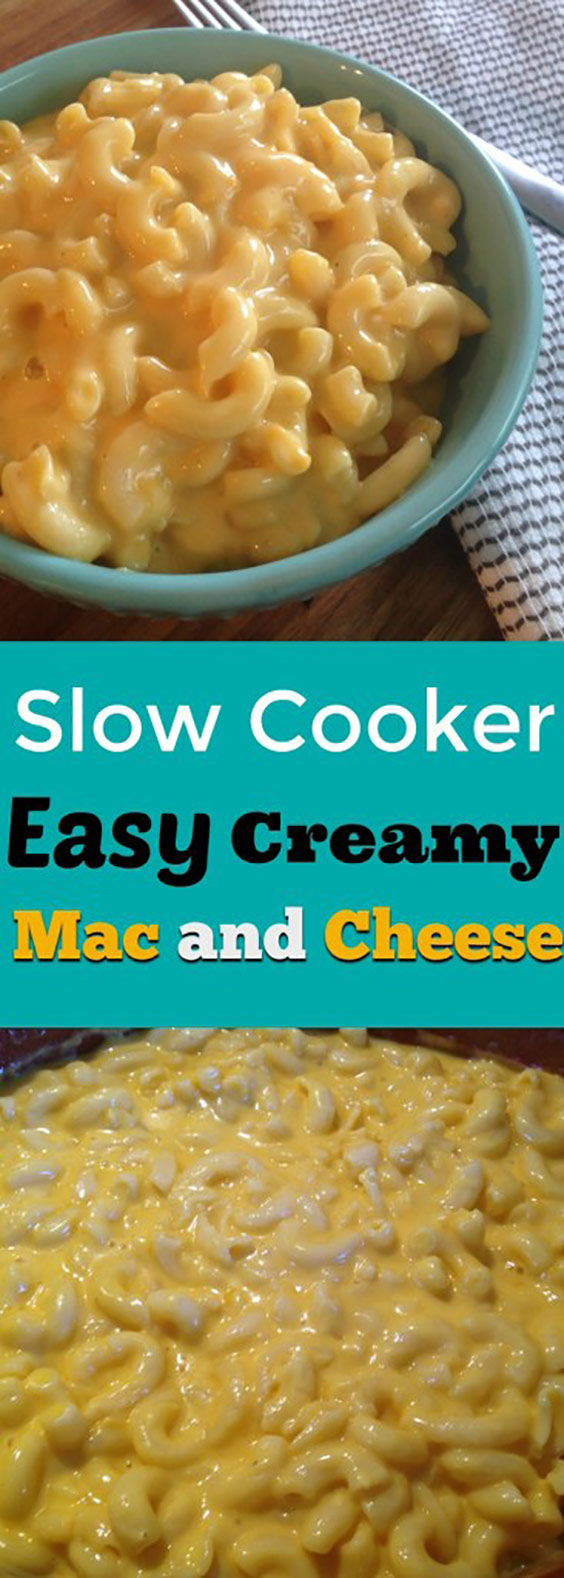 Slow Cooker Easy Creamy Mac and Cheese